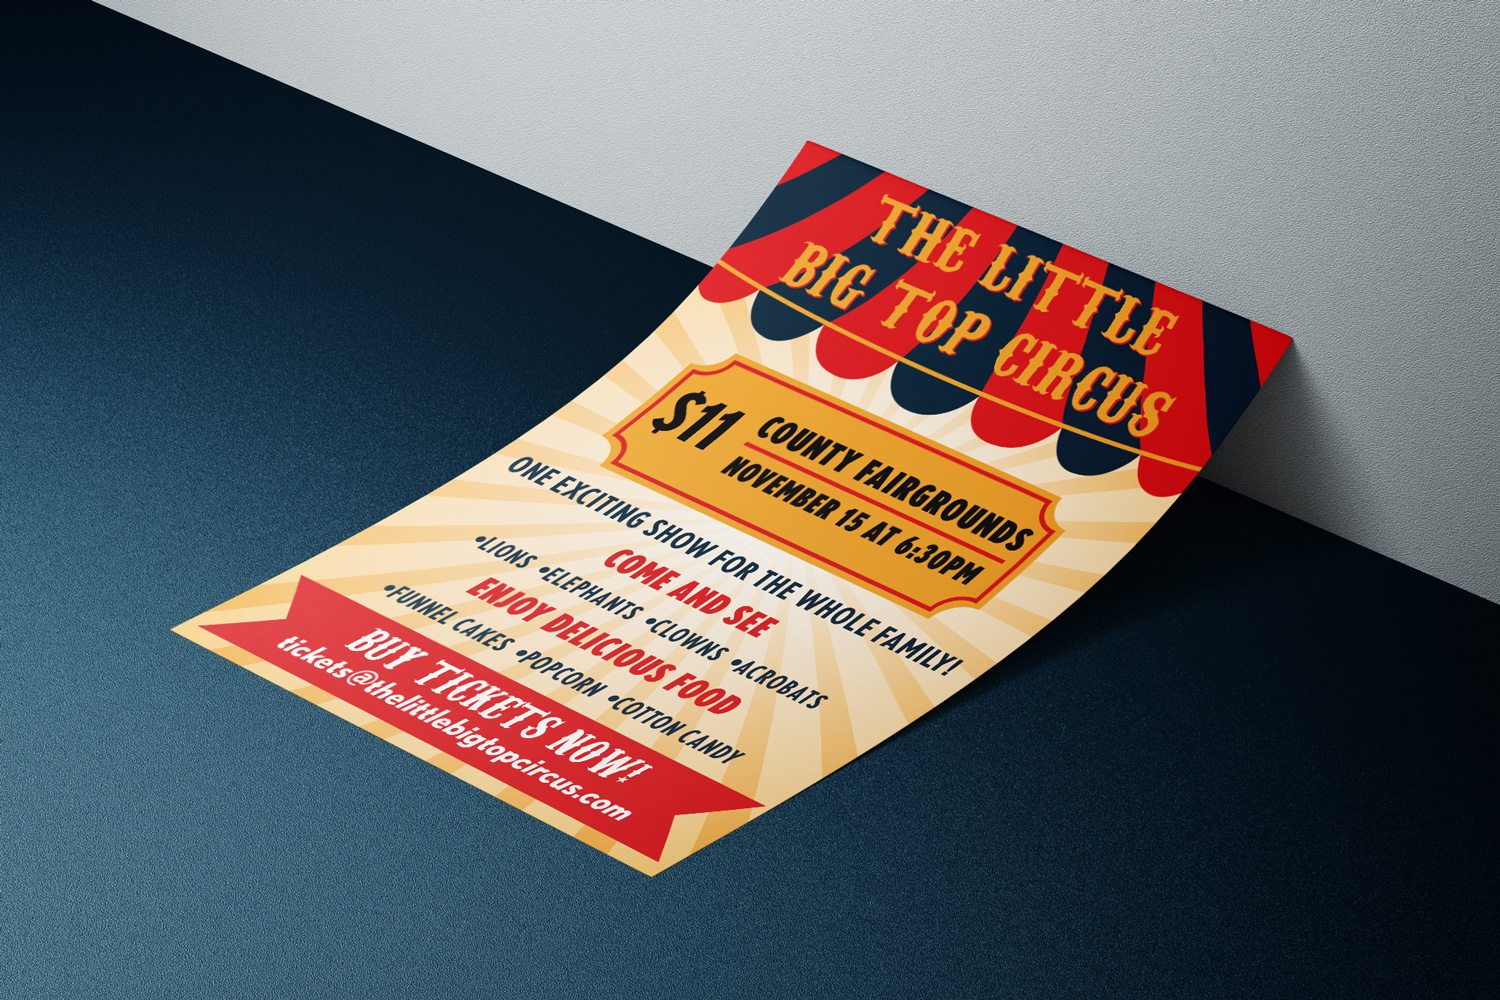 The Little Big Top Circus flyer mockup single page